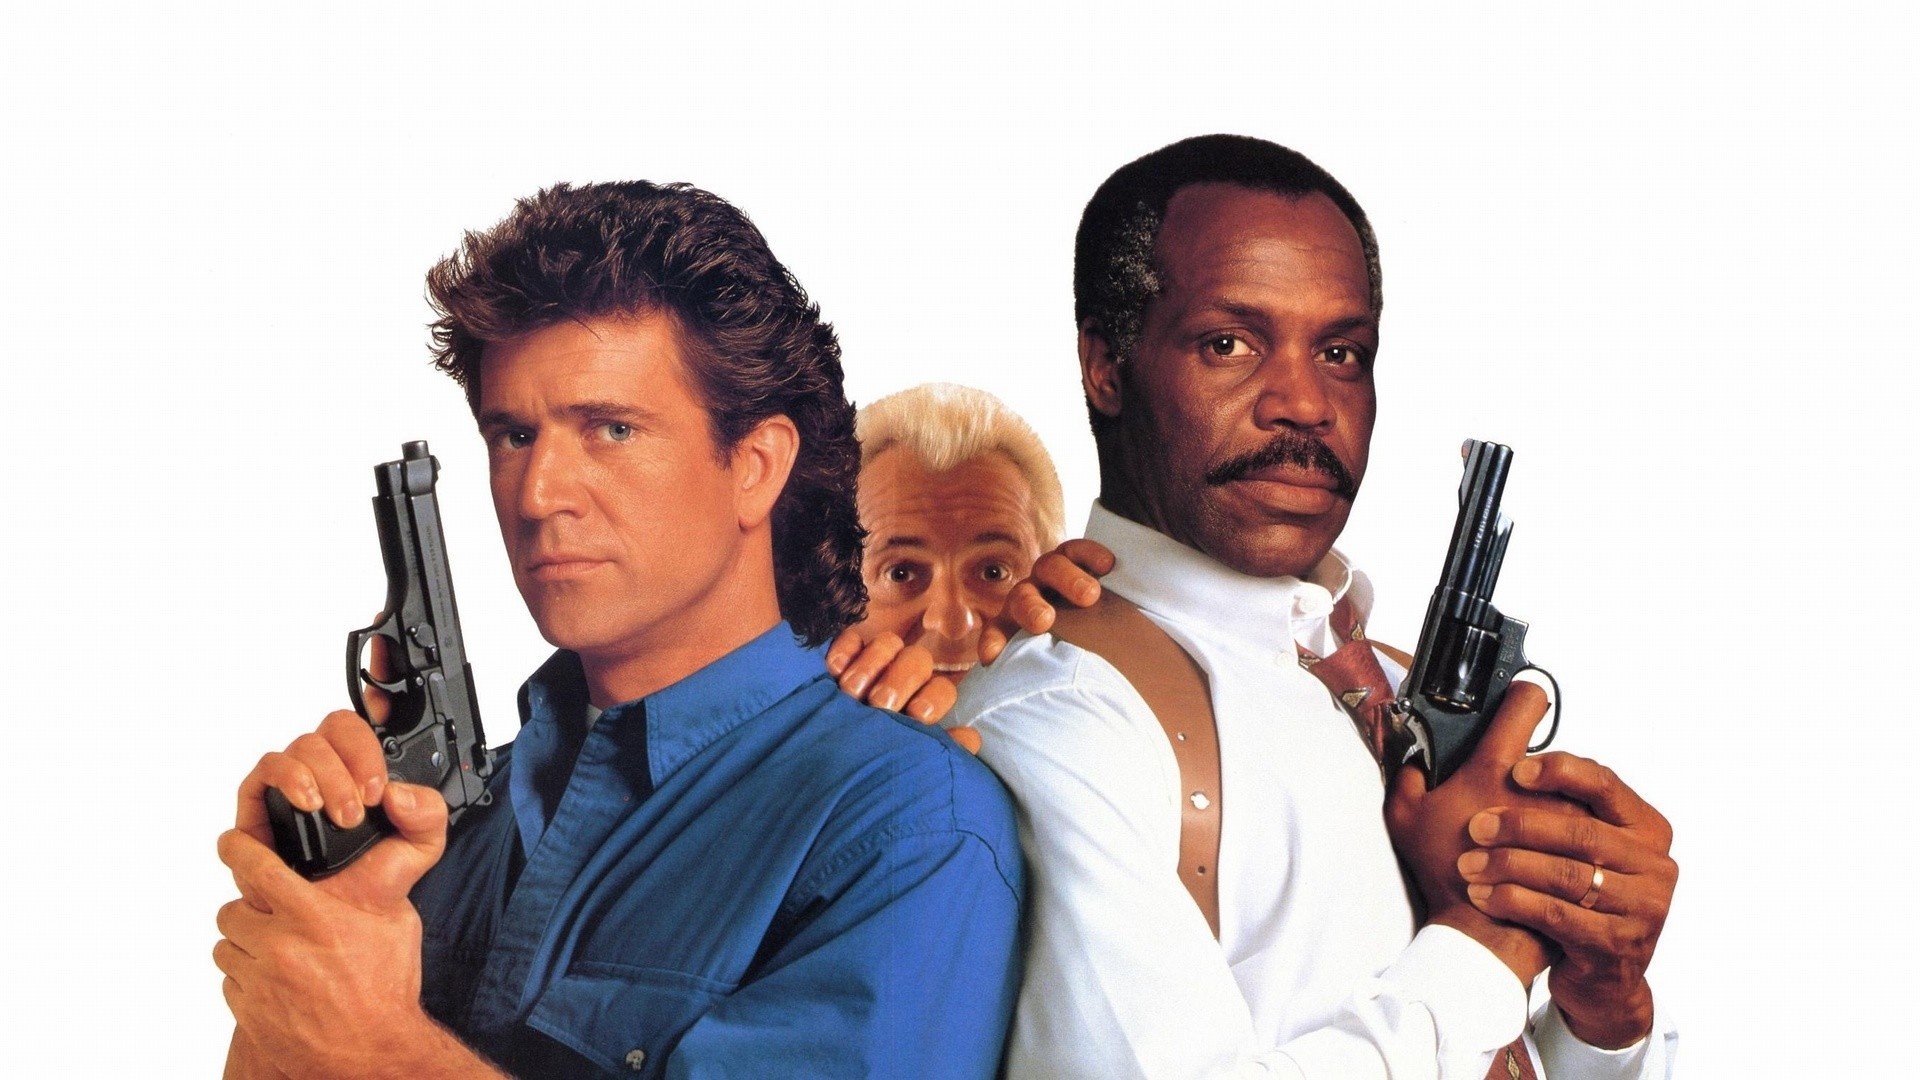 Lethal Weapon, High-quality wallpapers, 1920x1080 Full HD Desktop